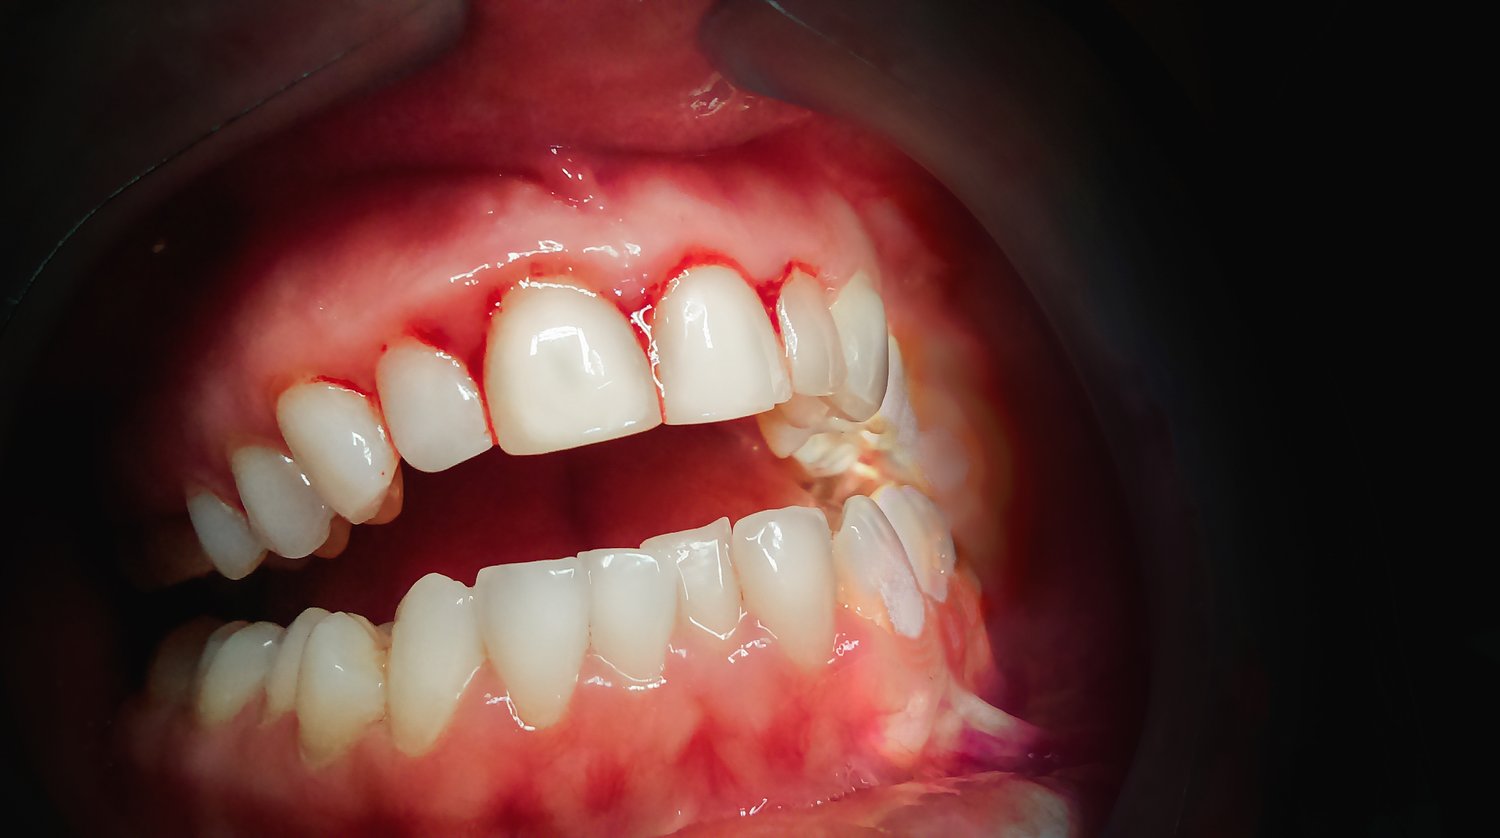 Bleeding Gums: Causes, Treatment, and Prevention - SmartMouth